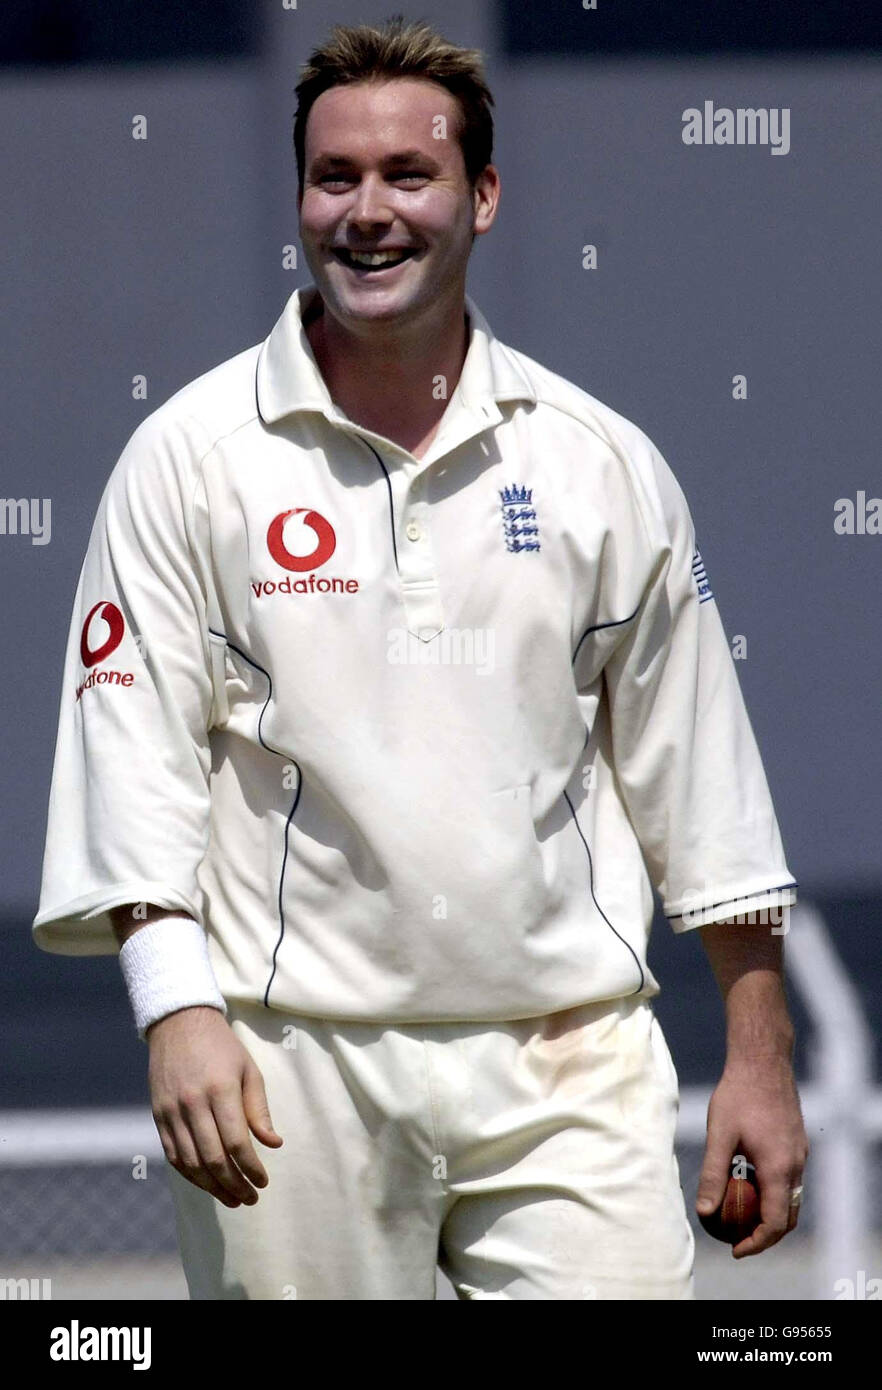 England's Ian Blackwell smiles during the second day of the opening tour match against the CCI Presidents XI at the Brabourne Stadium in Mumbai, India, Sunday February 19, 2006. PRESS ASSOCIATION Photo. Photo credit should read: Rebecca Naden/PA. Stock Photo